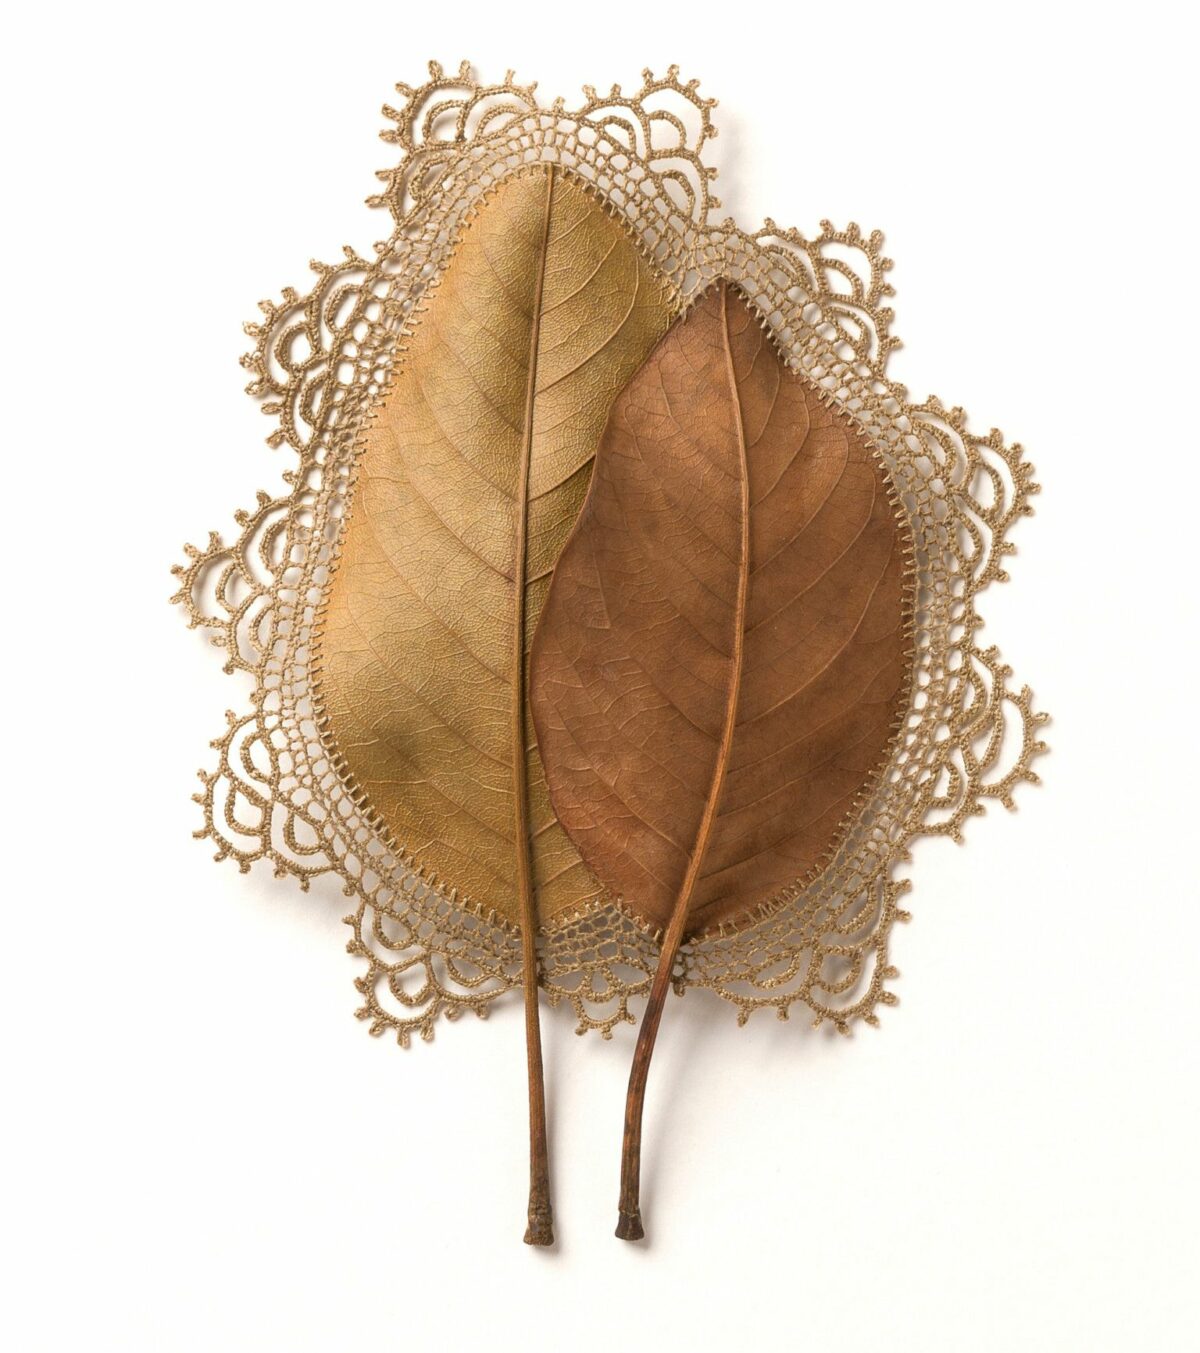 Beautiful Sculptures Of Dried Leaves Crocheted Delicate Patterns By Susanna Bauer 29